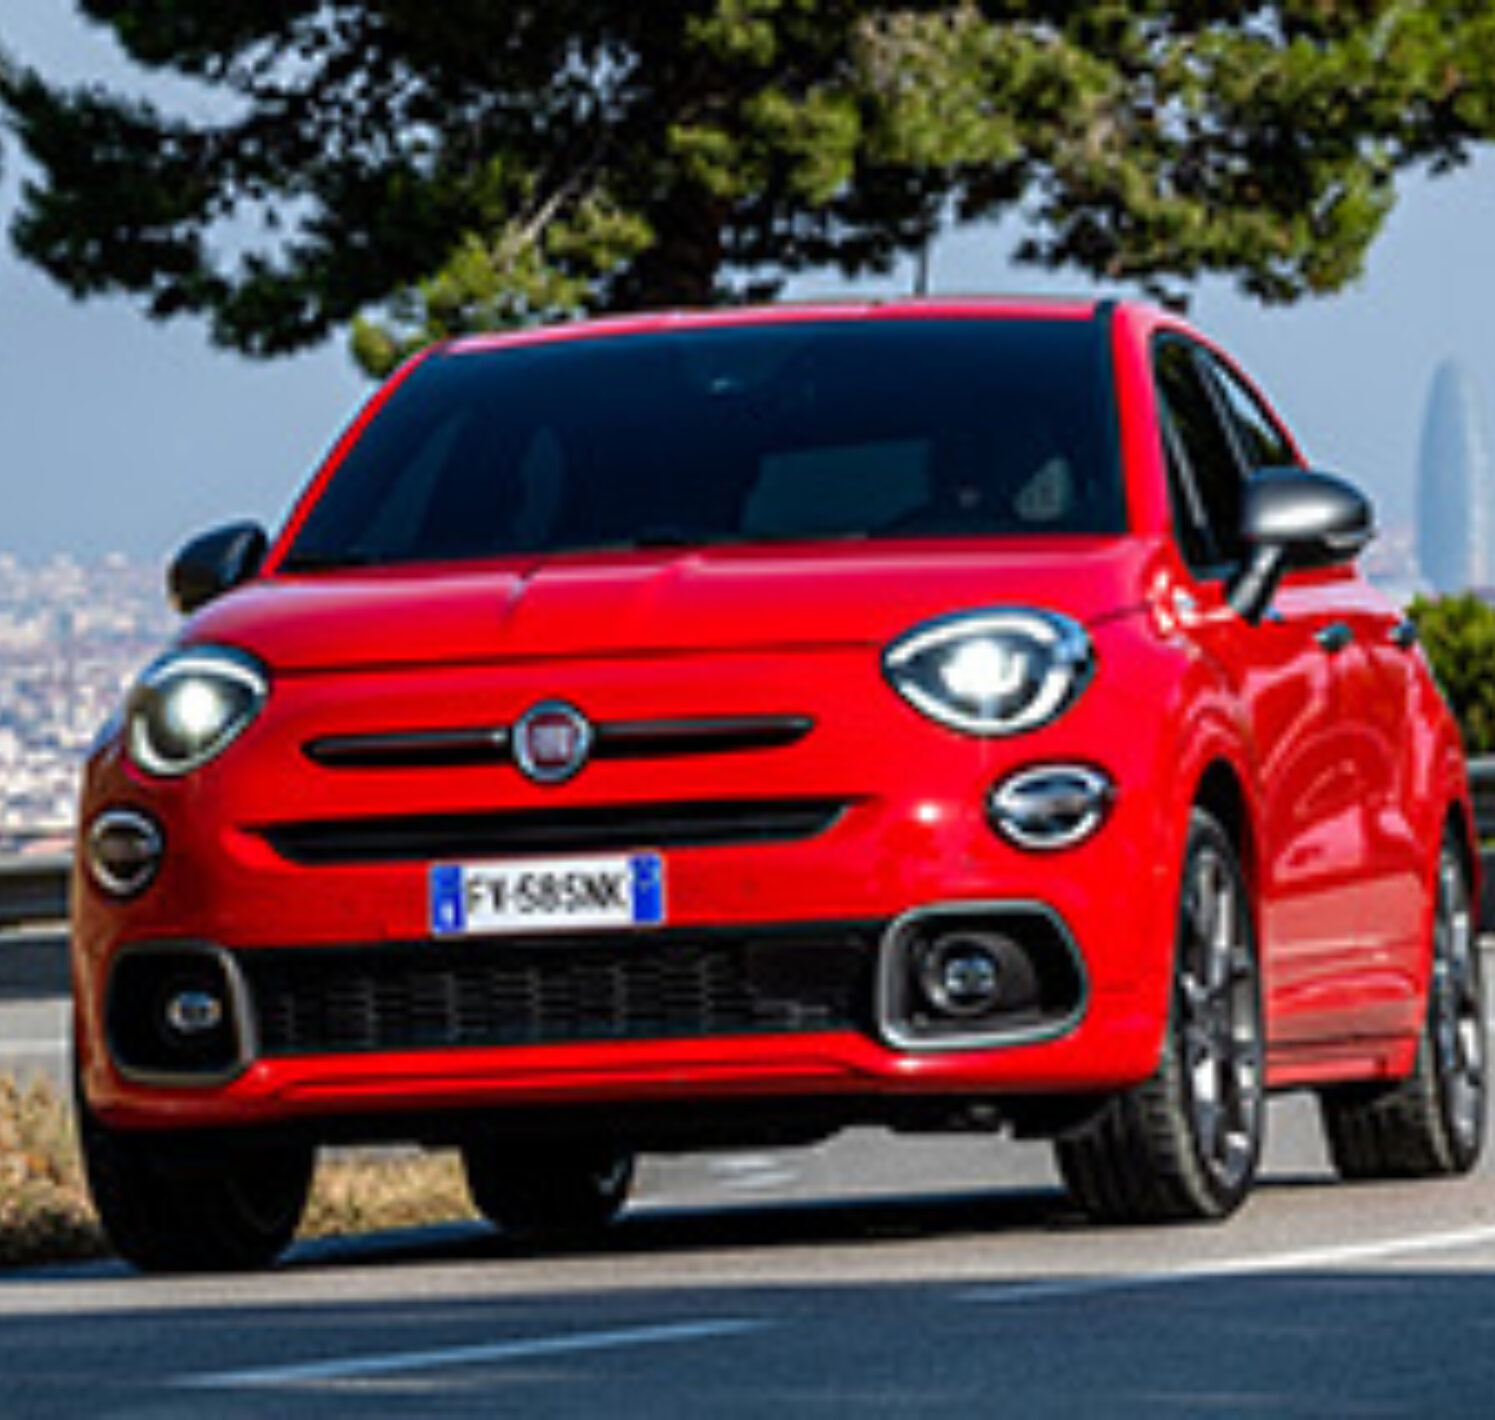 https://autofilter.sk/assets/images/fiat-500-x-urban-look/gallery/fiat-500X-sport-red-suv-03-mobile-300x213.jpg - obrazok